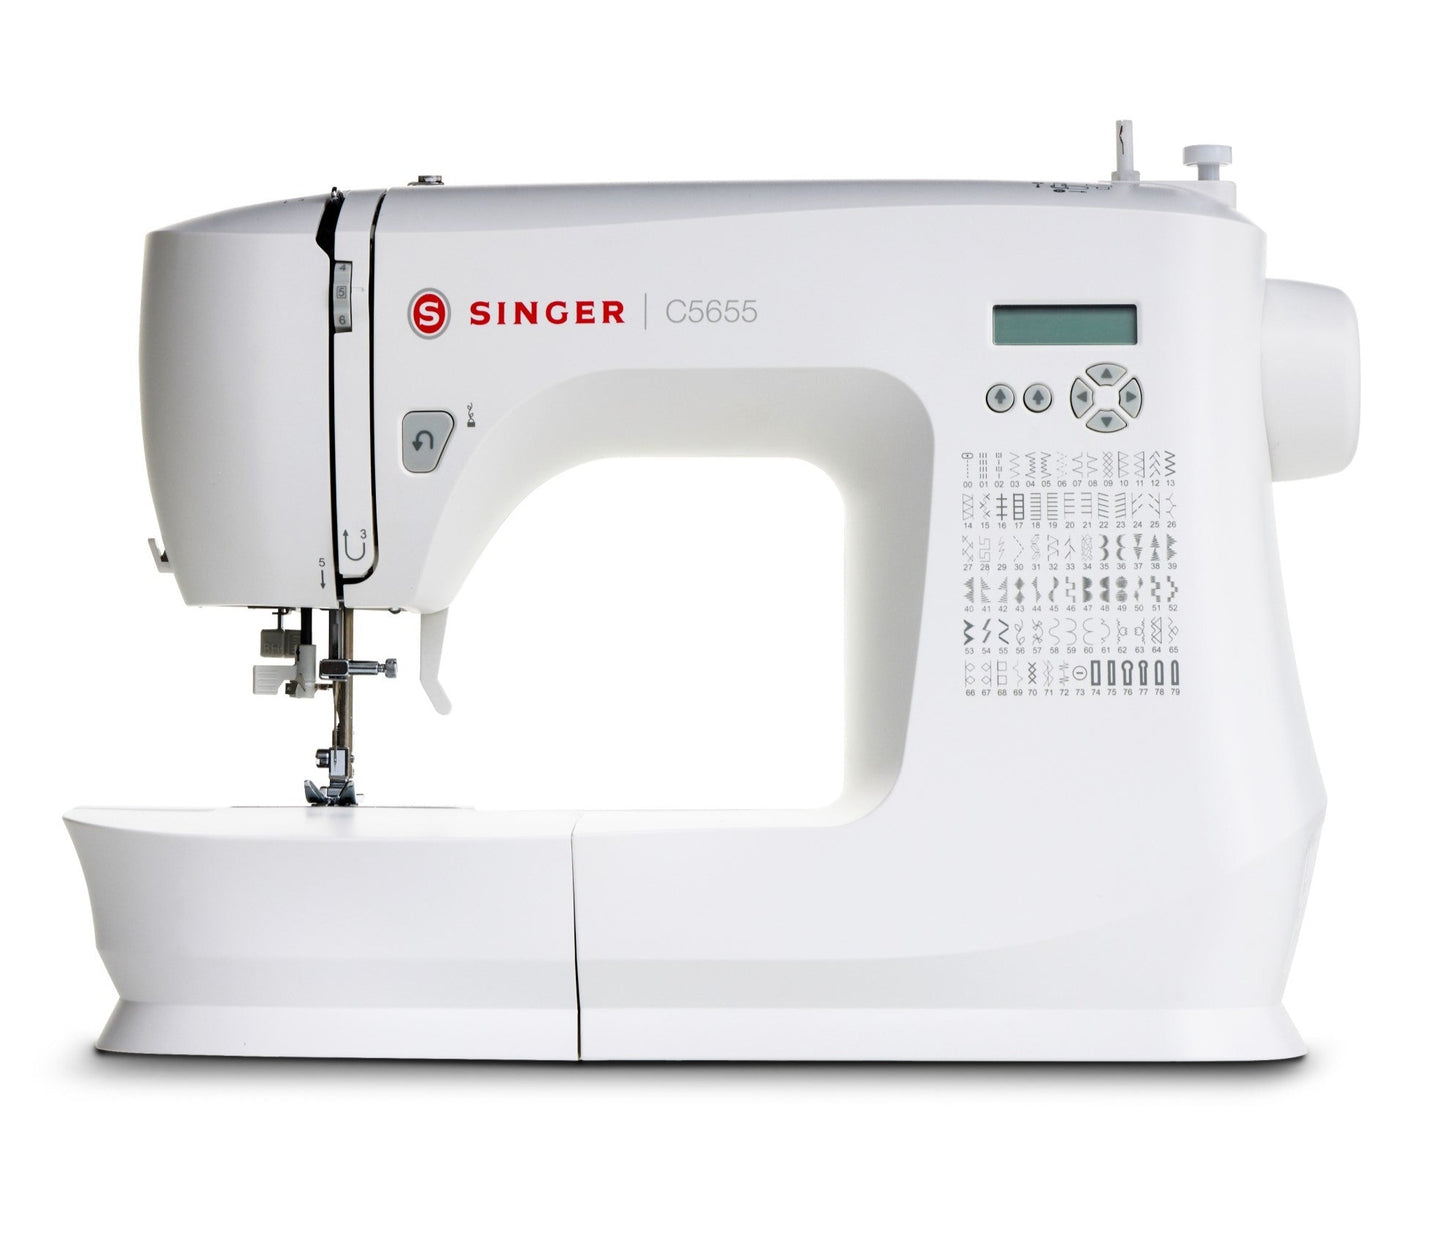 Singer C5655 Sewing Machine with Large Extension Table - 80 stitch patterns